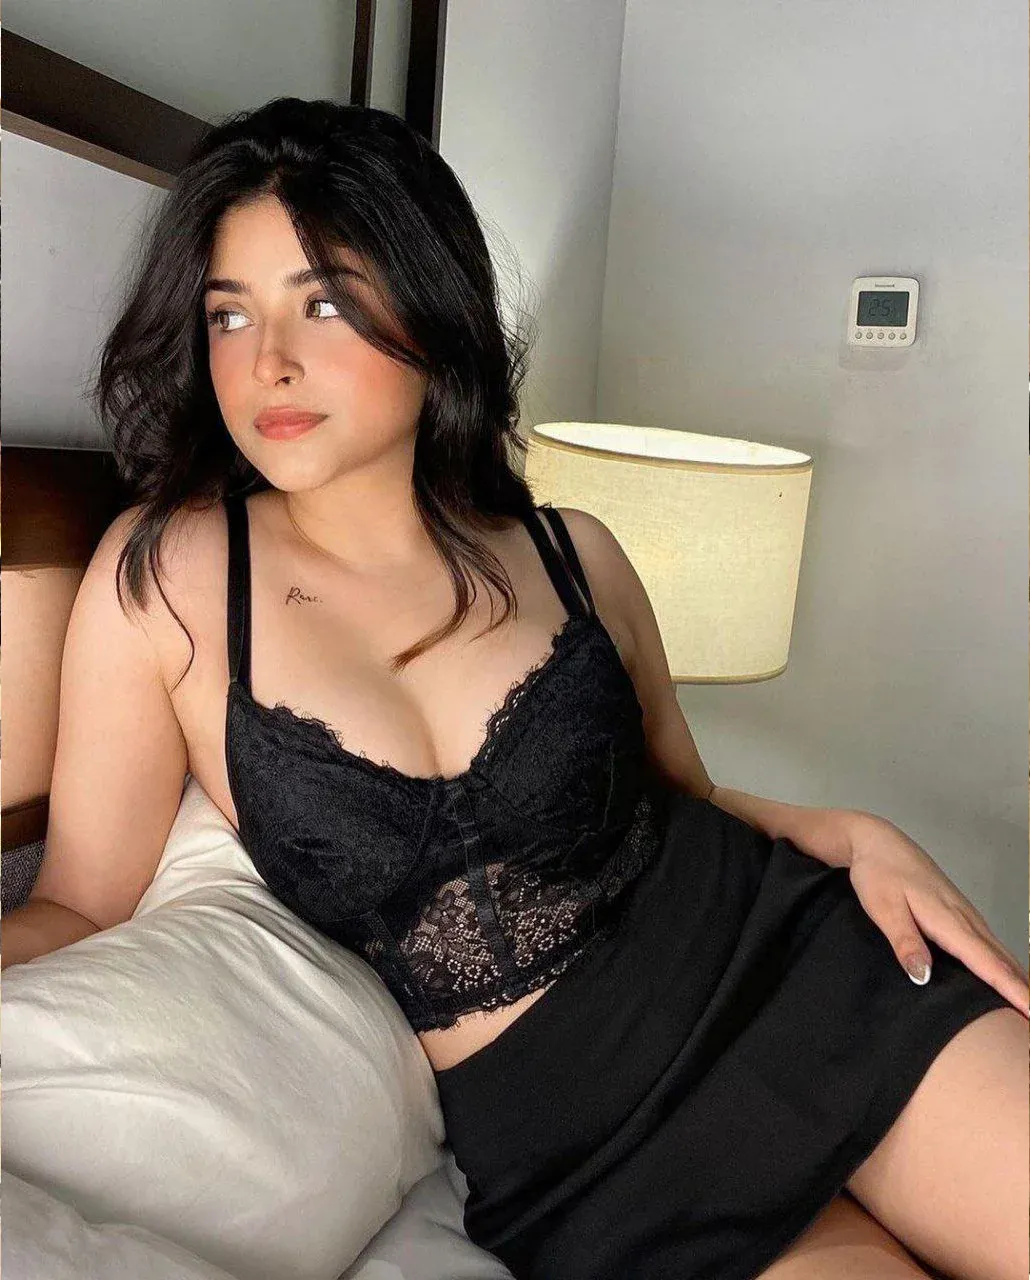 Escorts Service In Bandra at 6k to 50k along with Free Room